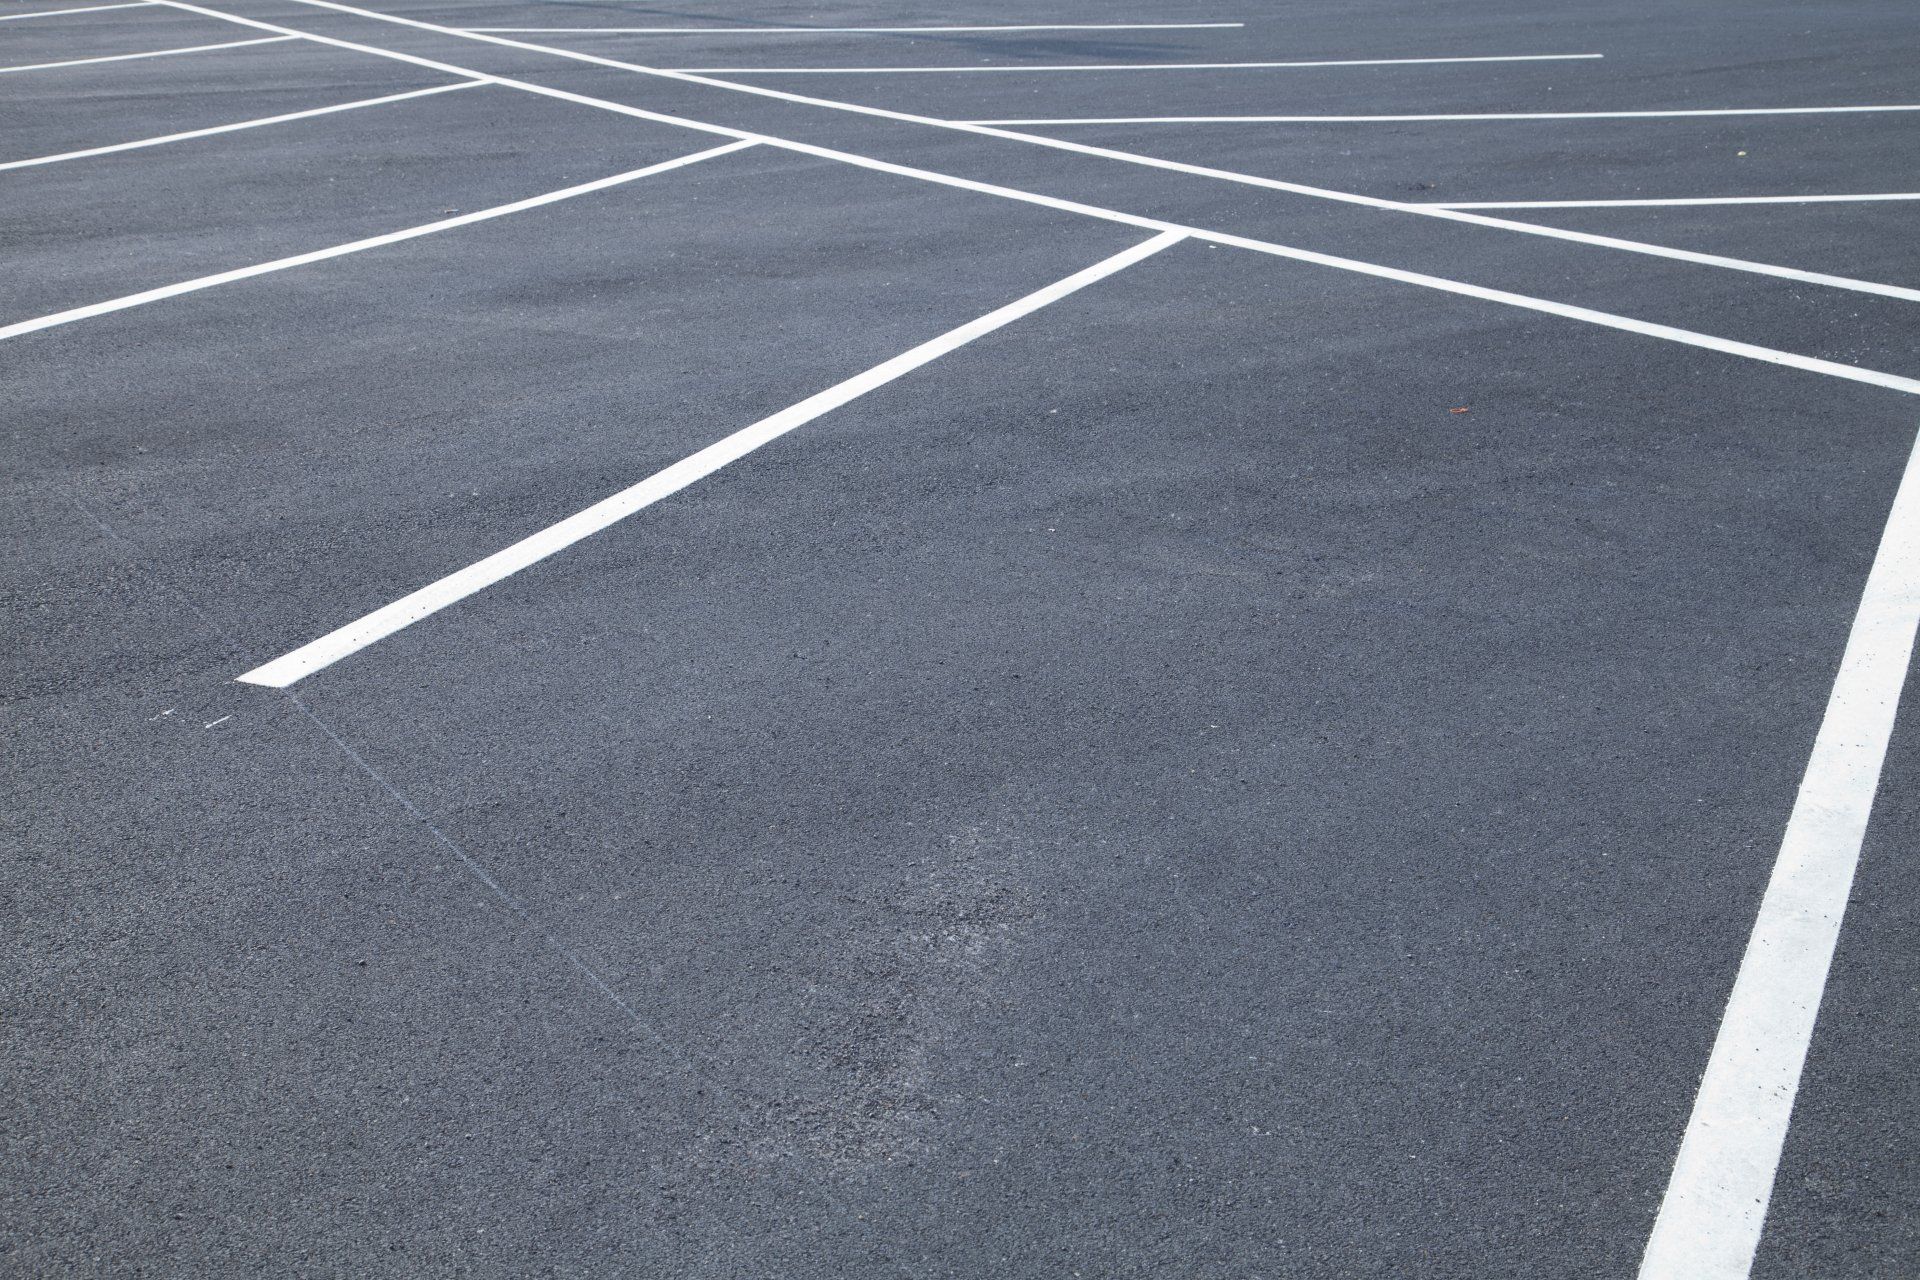 Sealing and striping the parking lot to assist people in clearly identifying these areas, ensuring that they're following the law and providing adequate accommodations for disabled residents or customers.